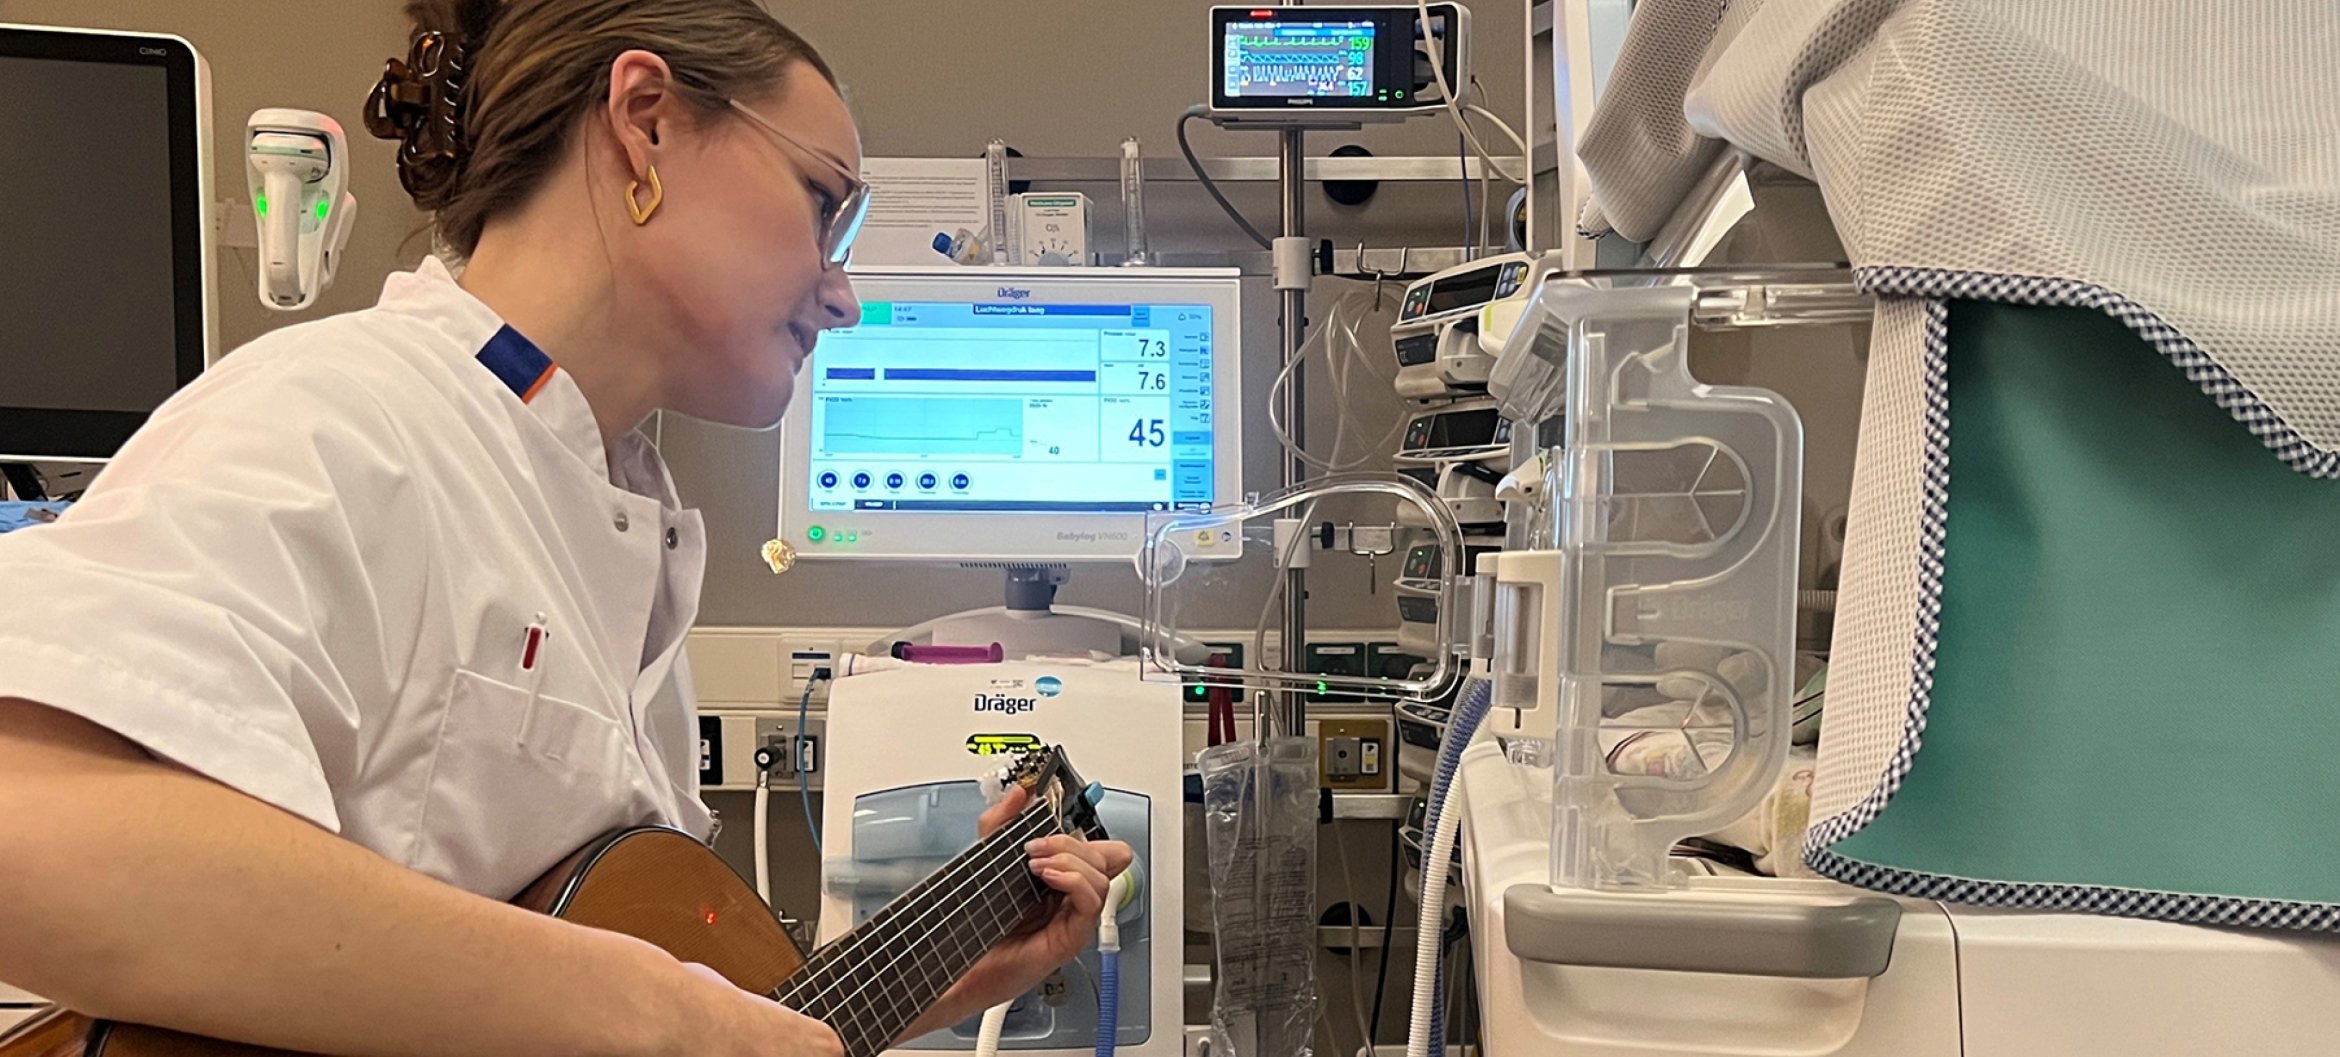 Melodies of hope: music therapy for premature babies